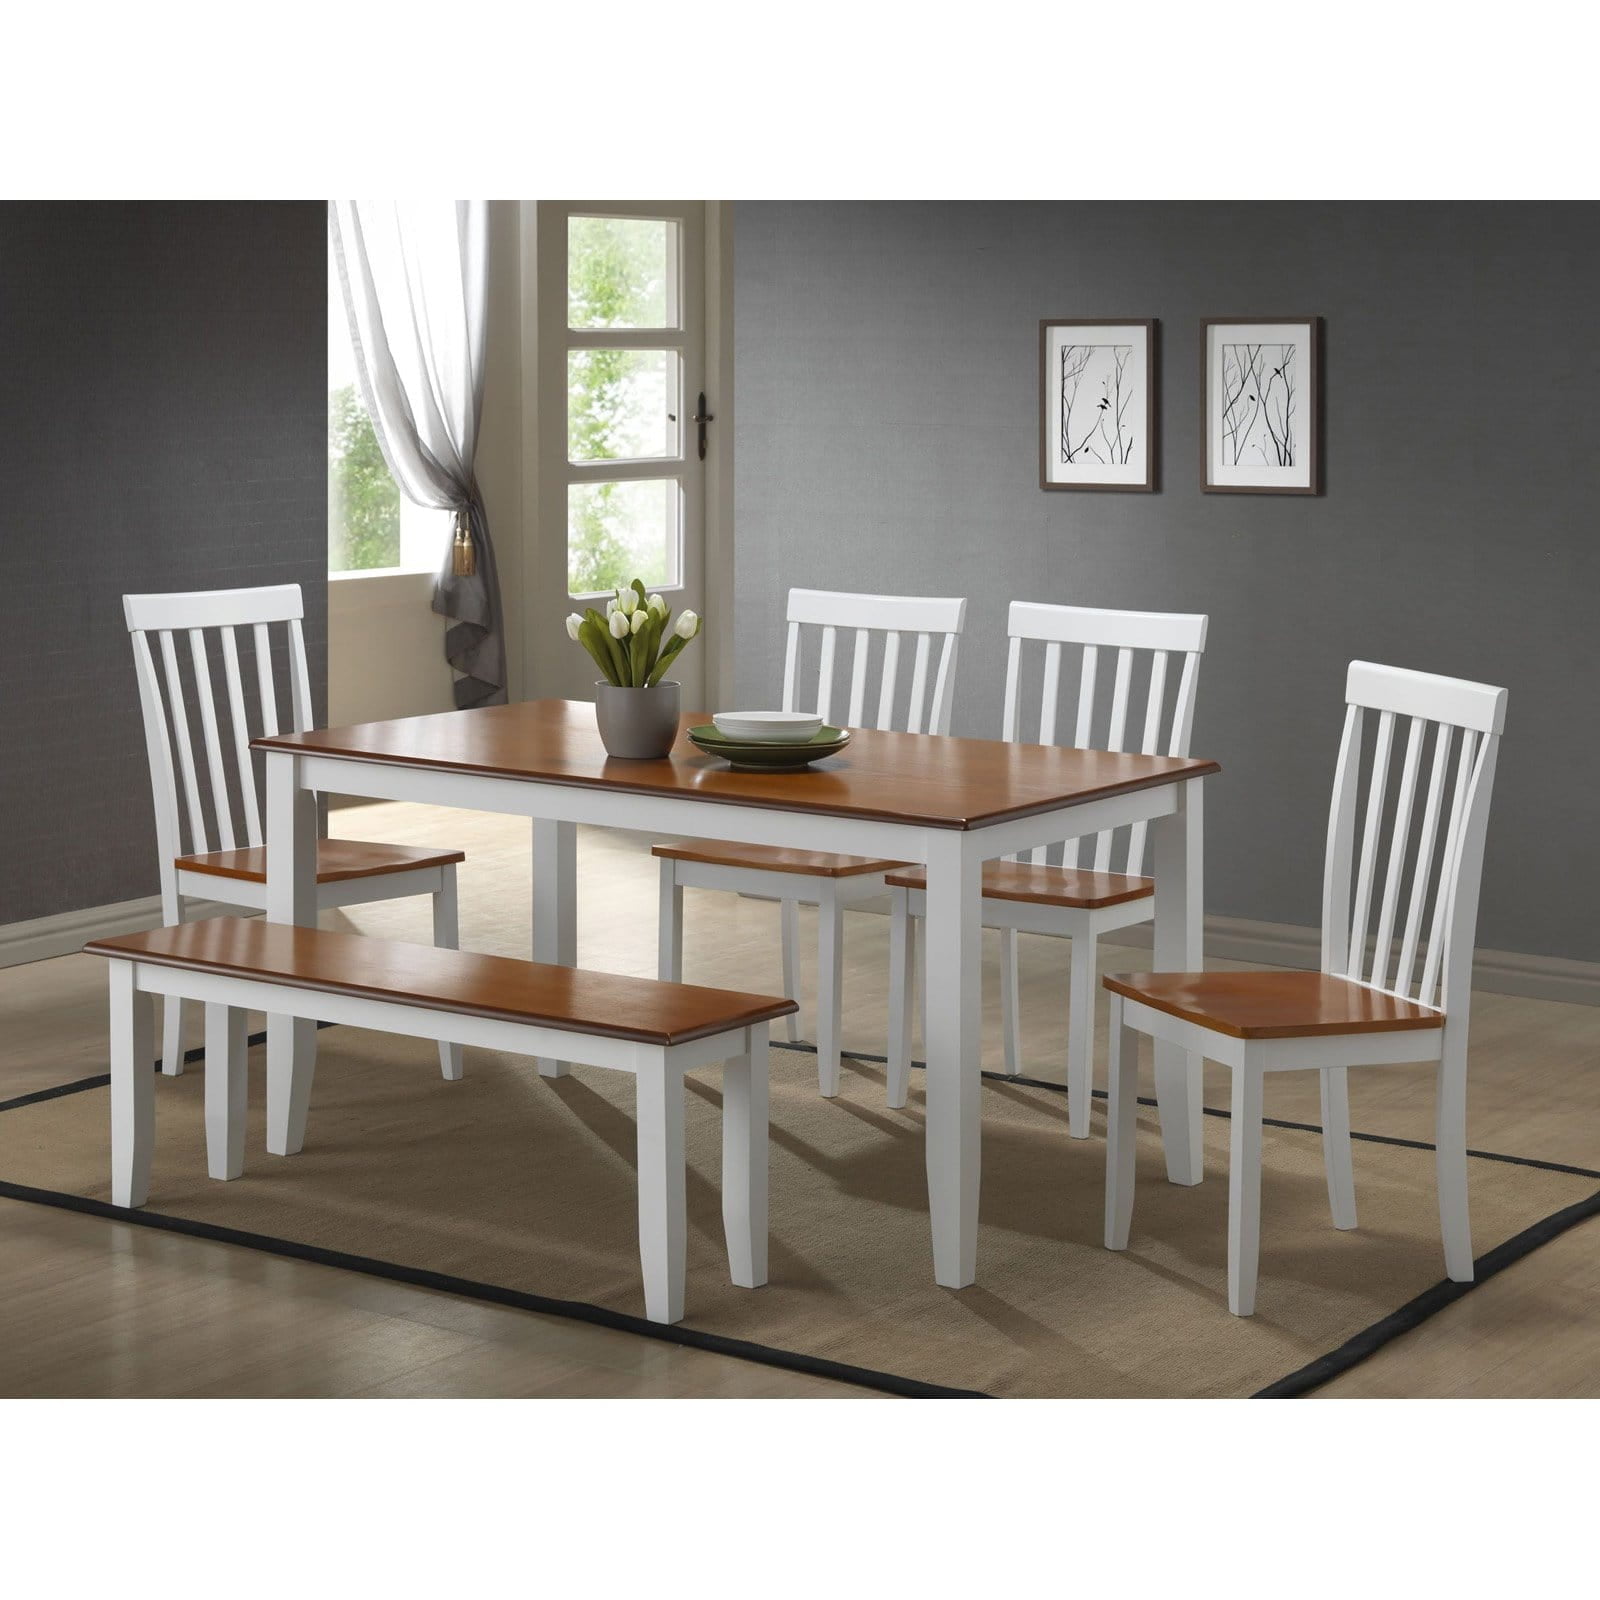 Boraam Bloomington 6 Piece Dining Set, Honey Oak Dining Room Table And Chairs White